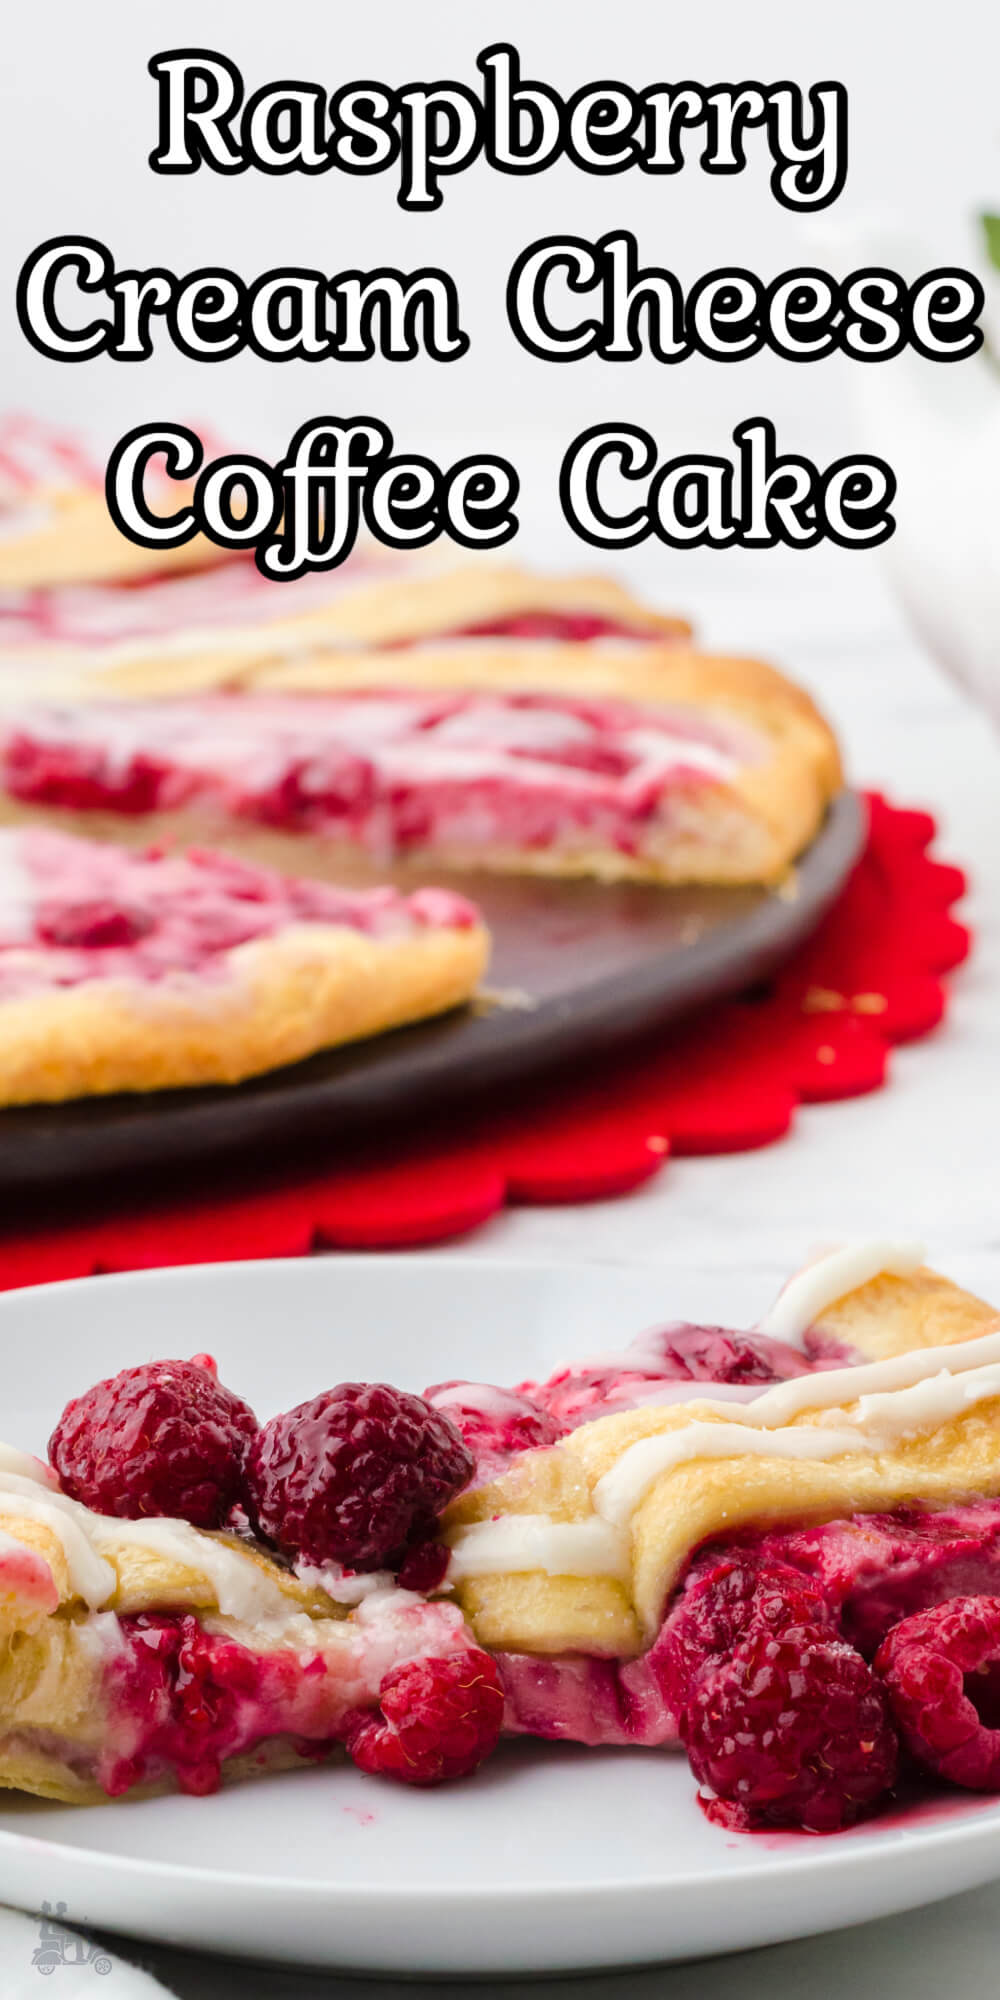 This cream cheese coffee cake tastes just like a delicious bakery danish flavored with raspberries. A delicious breakfast or brunch treat that's quick and easy to make. A beautiful coffee cake worthy to serve during the holidays and easy enough to make for just you to enjoy with some coffee or tea.